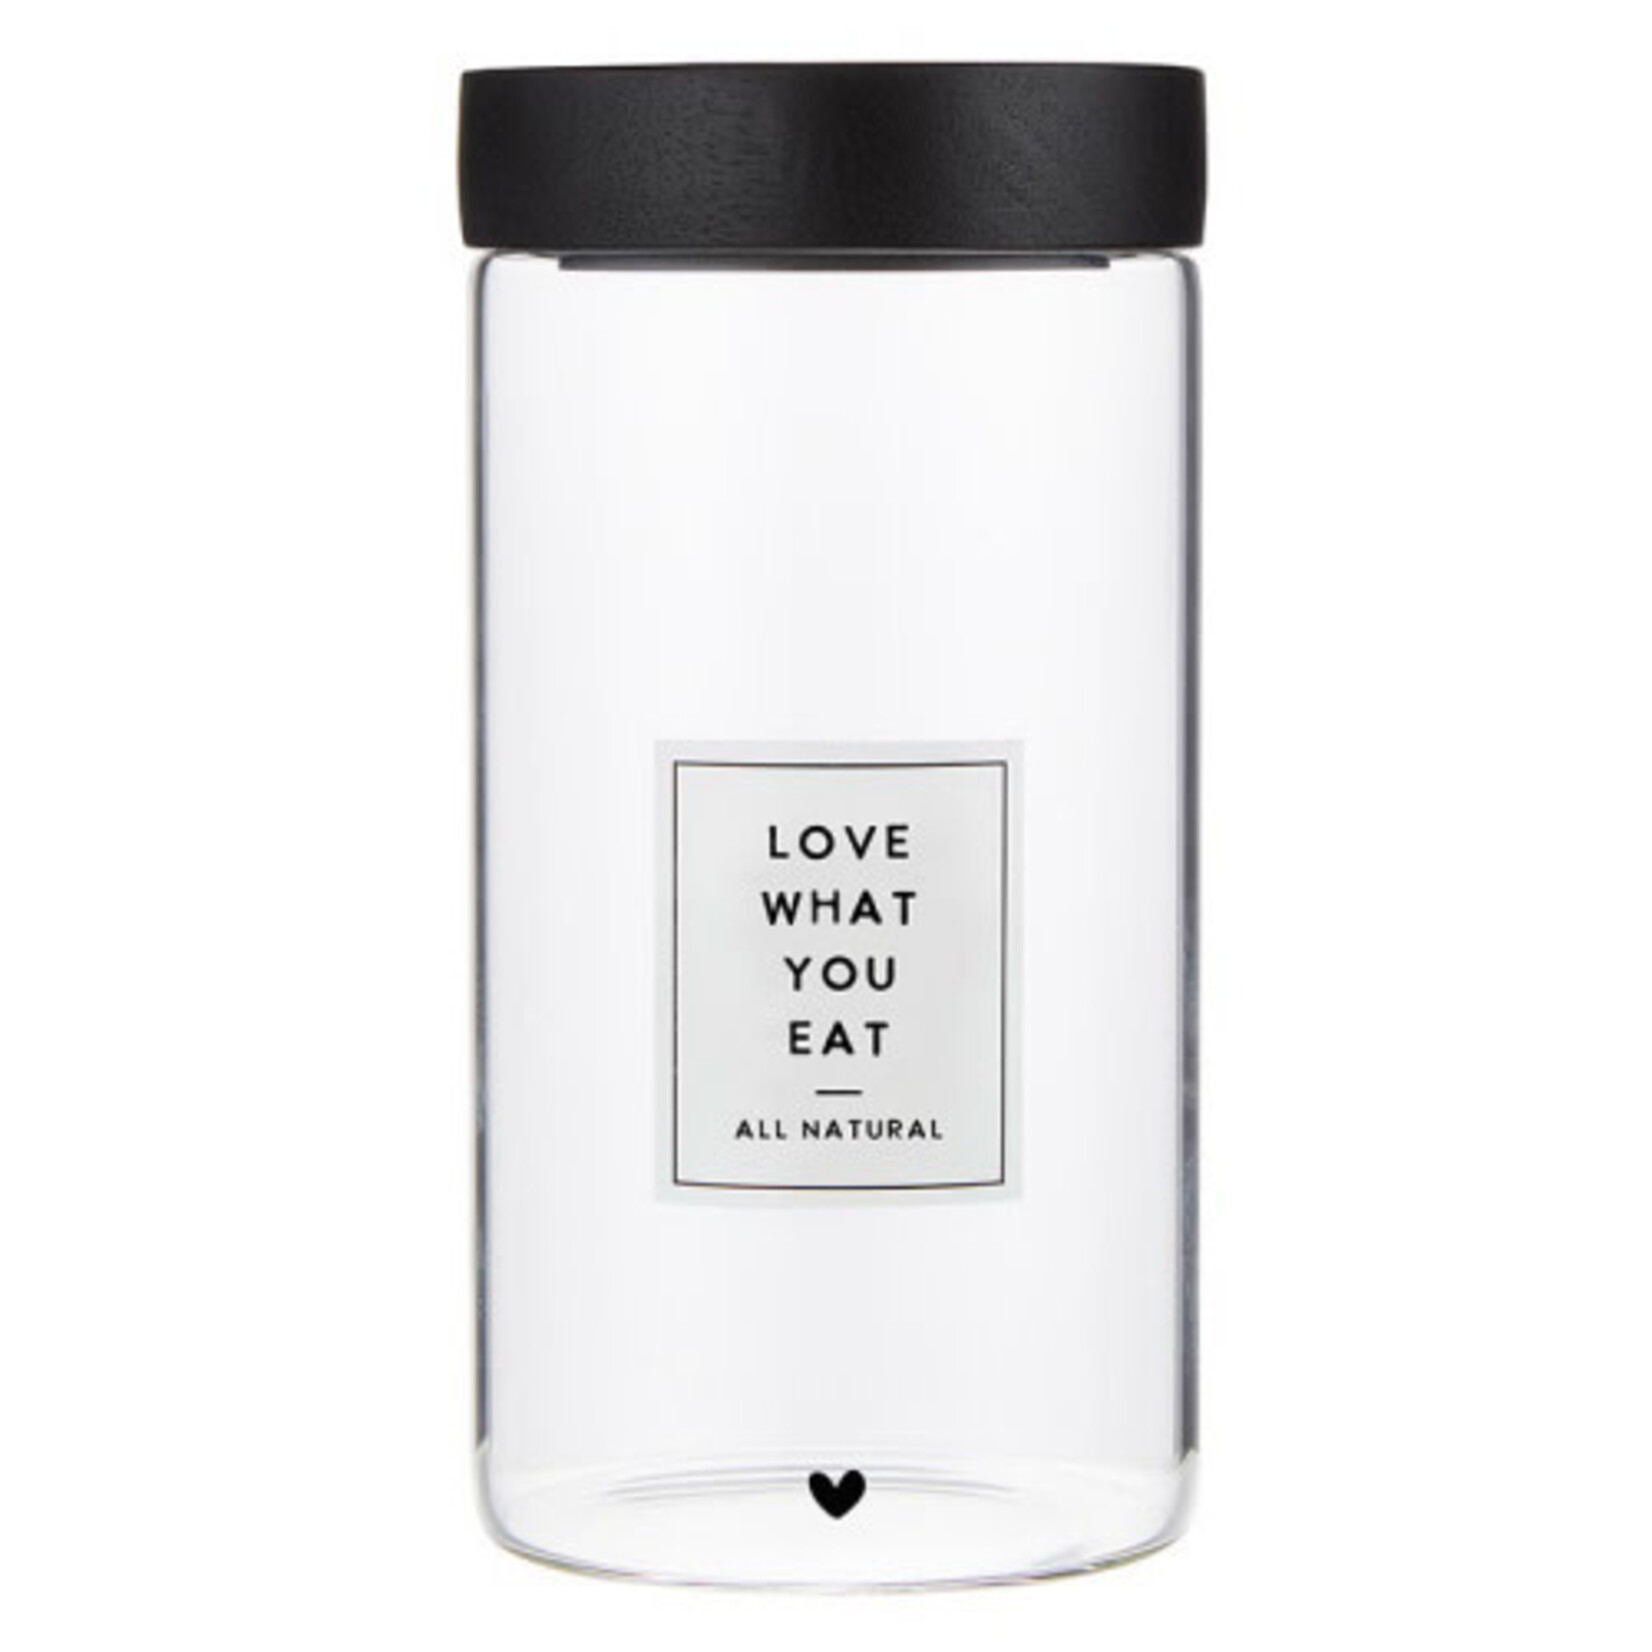 Creative Brands Love What You Eat Pantry Canister